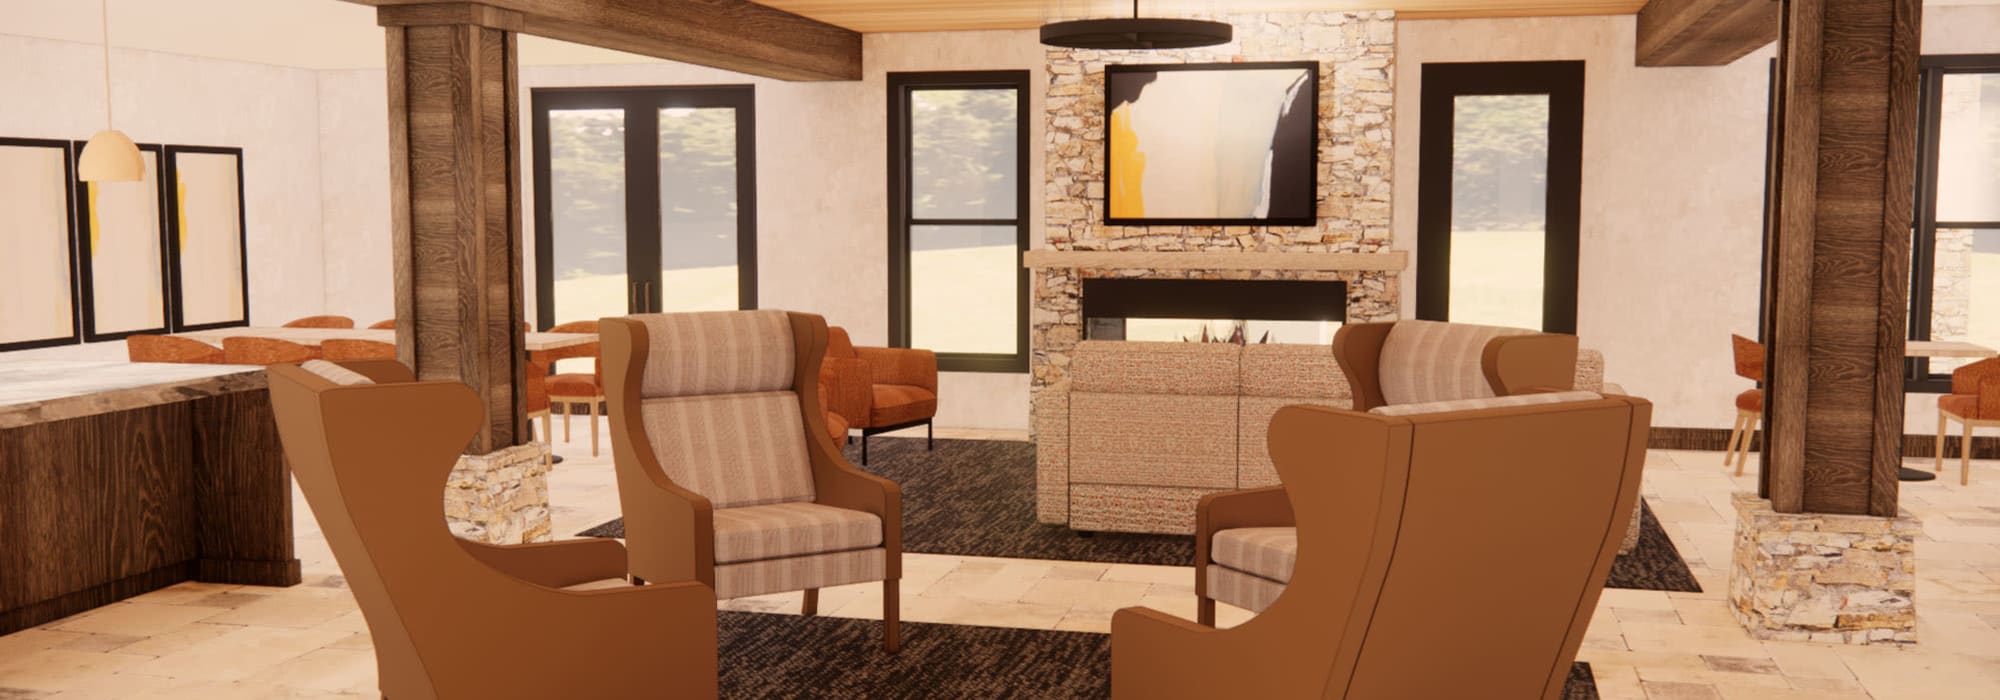 Community room TV and fireplace  Sandhill Shores in Stillwater, Minnesota